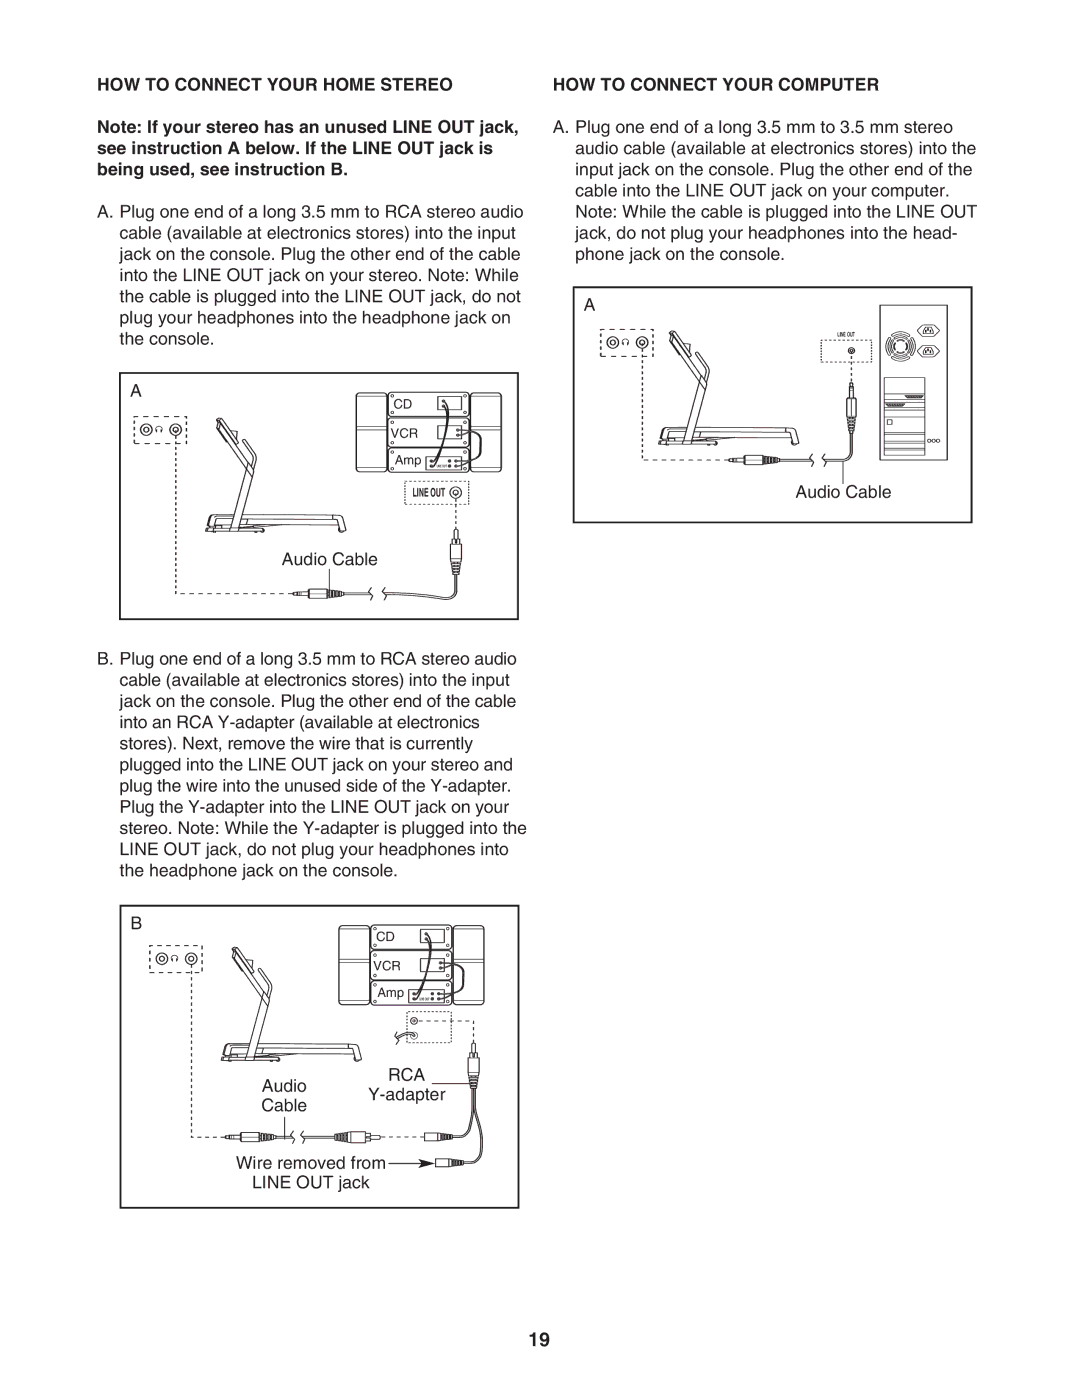 Inter-Tel PATL41106.0 user manual HOW to Connect Your Home Stereo, HOW to Connect Your Computer 